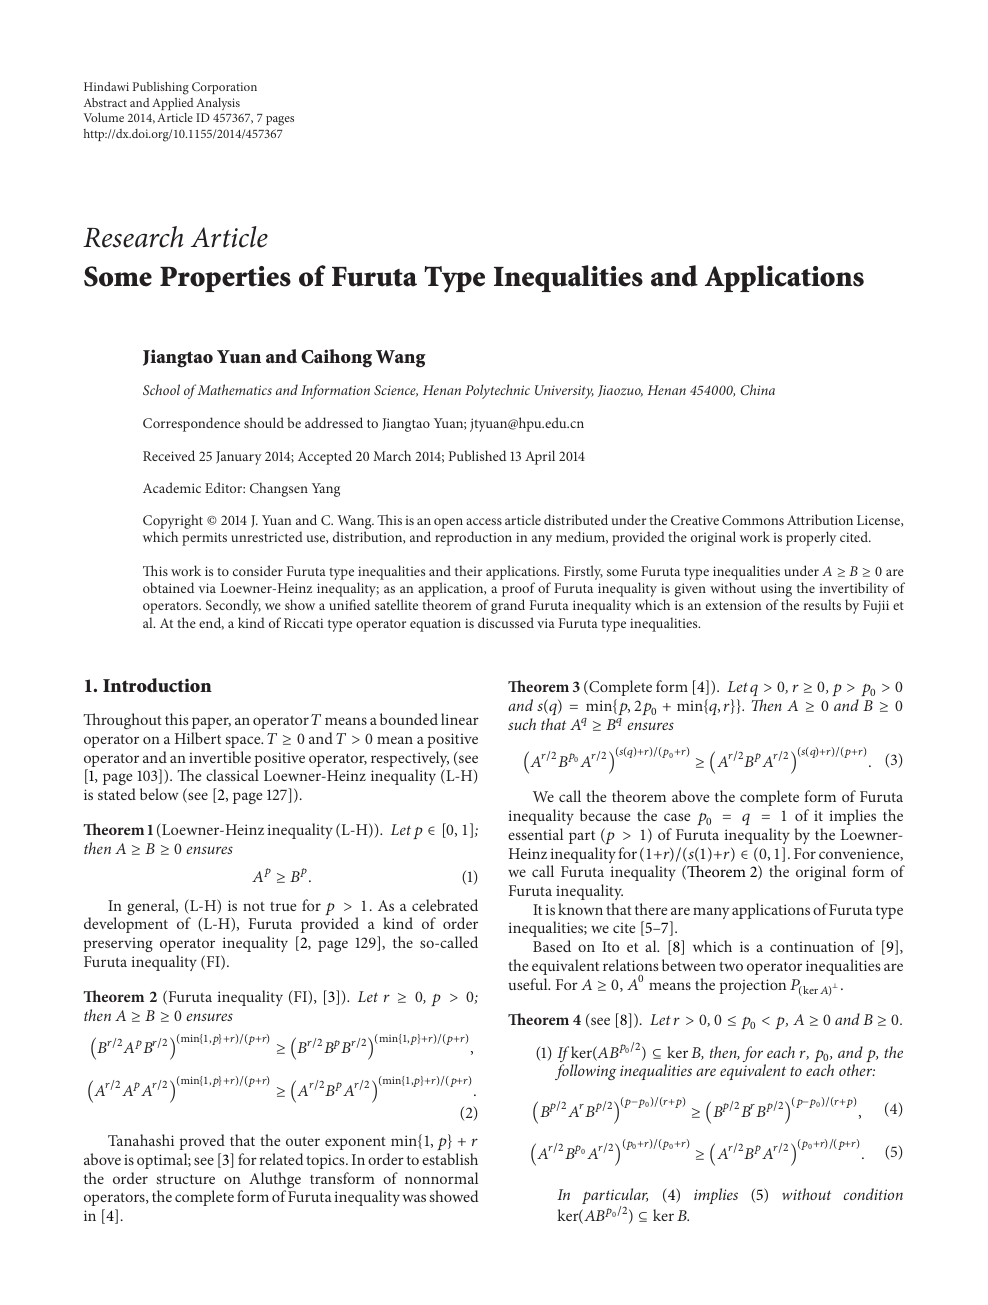 Some Properties Of Furuta Type Inequalities And Applications Topic Of Research Paper In Mathematics Download Scholarly Article Pdf And Read For Free On Cyberleninka Open Science Hub